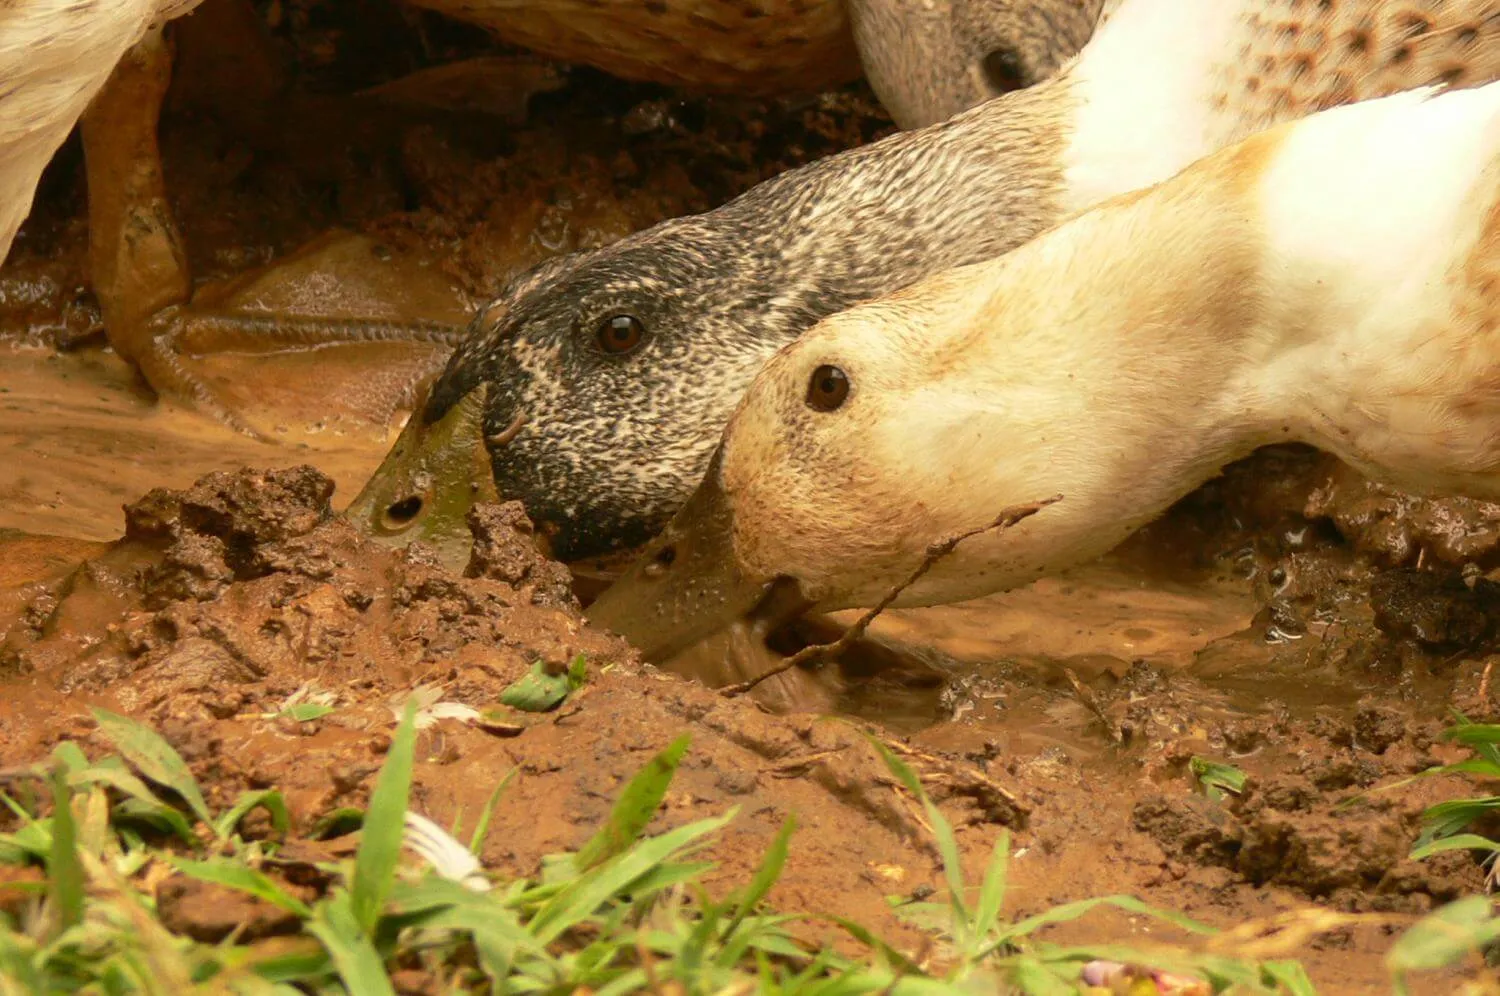 two ducks playing in mud